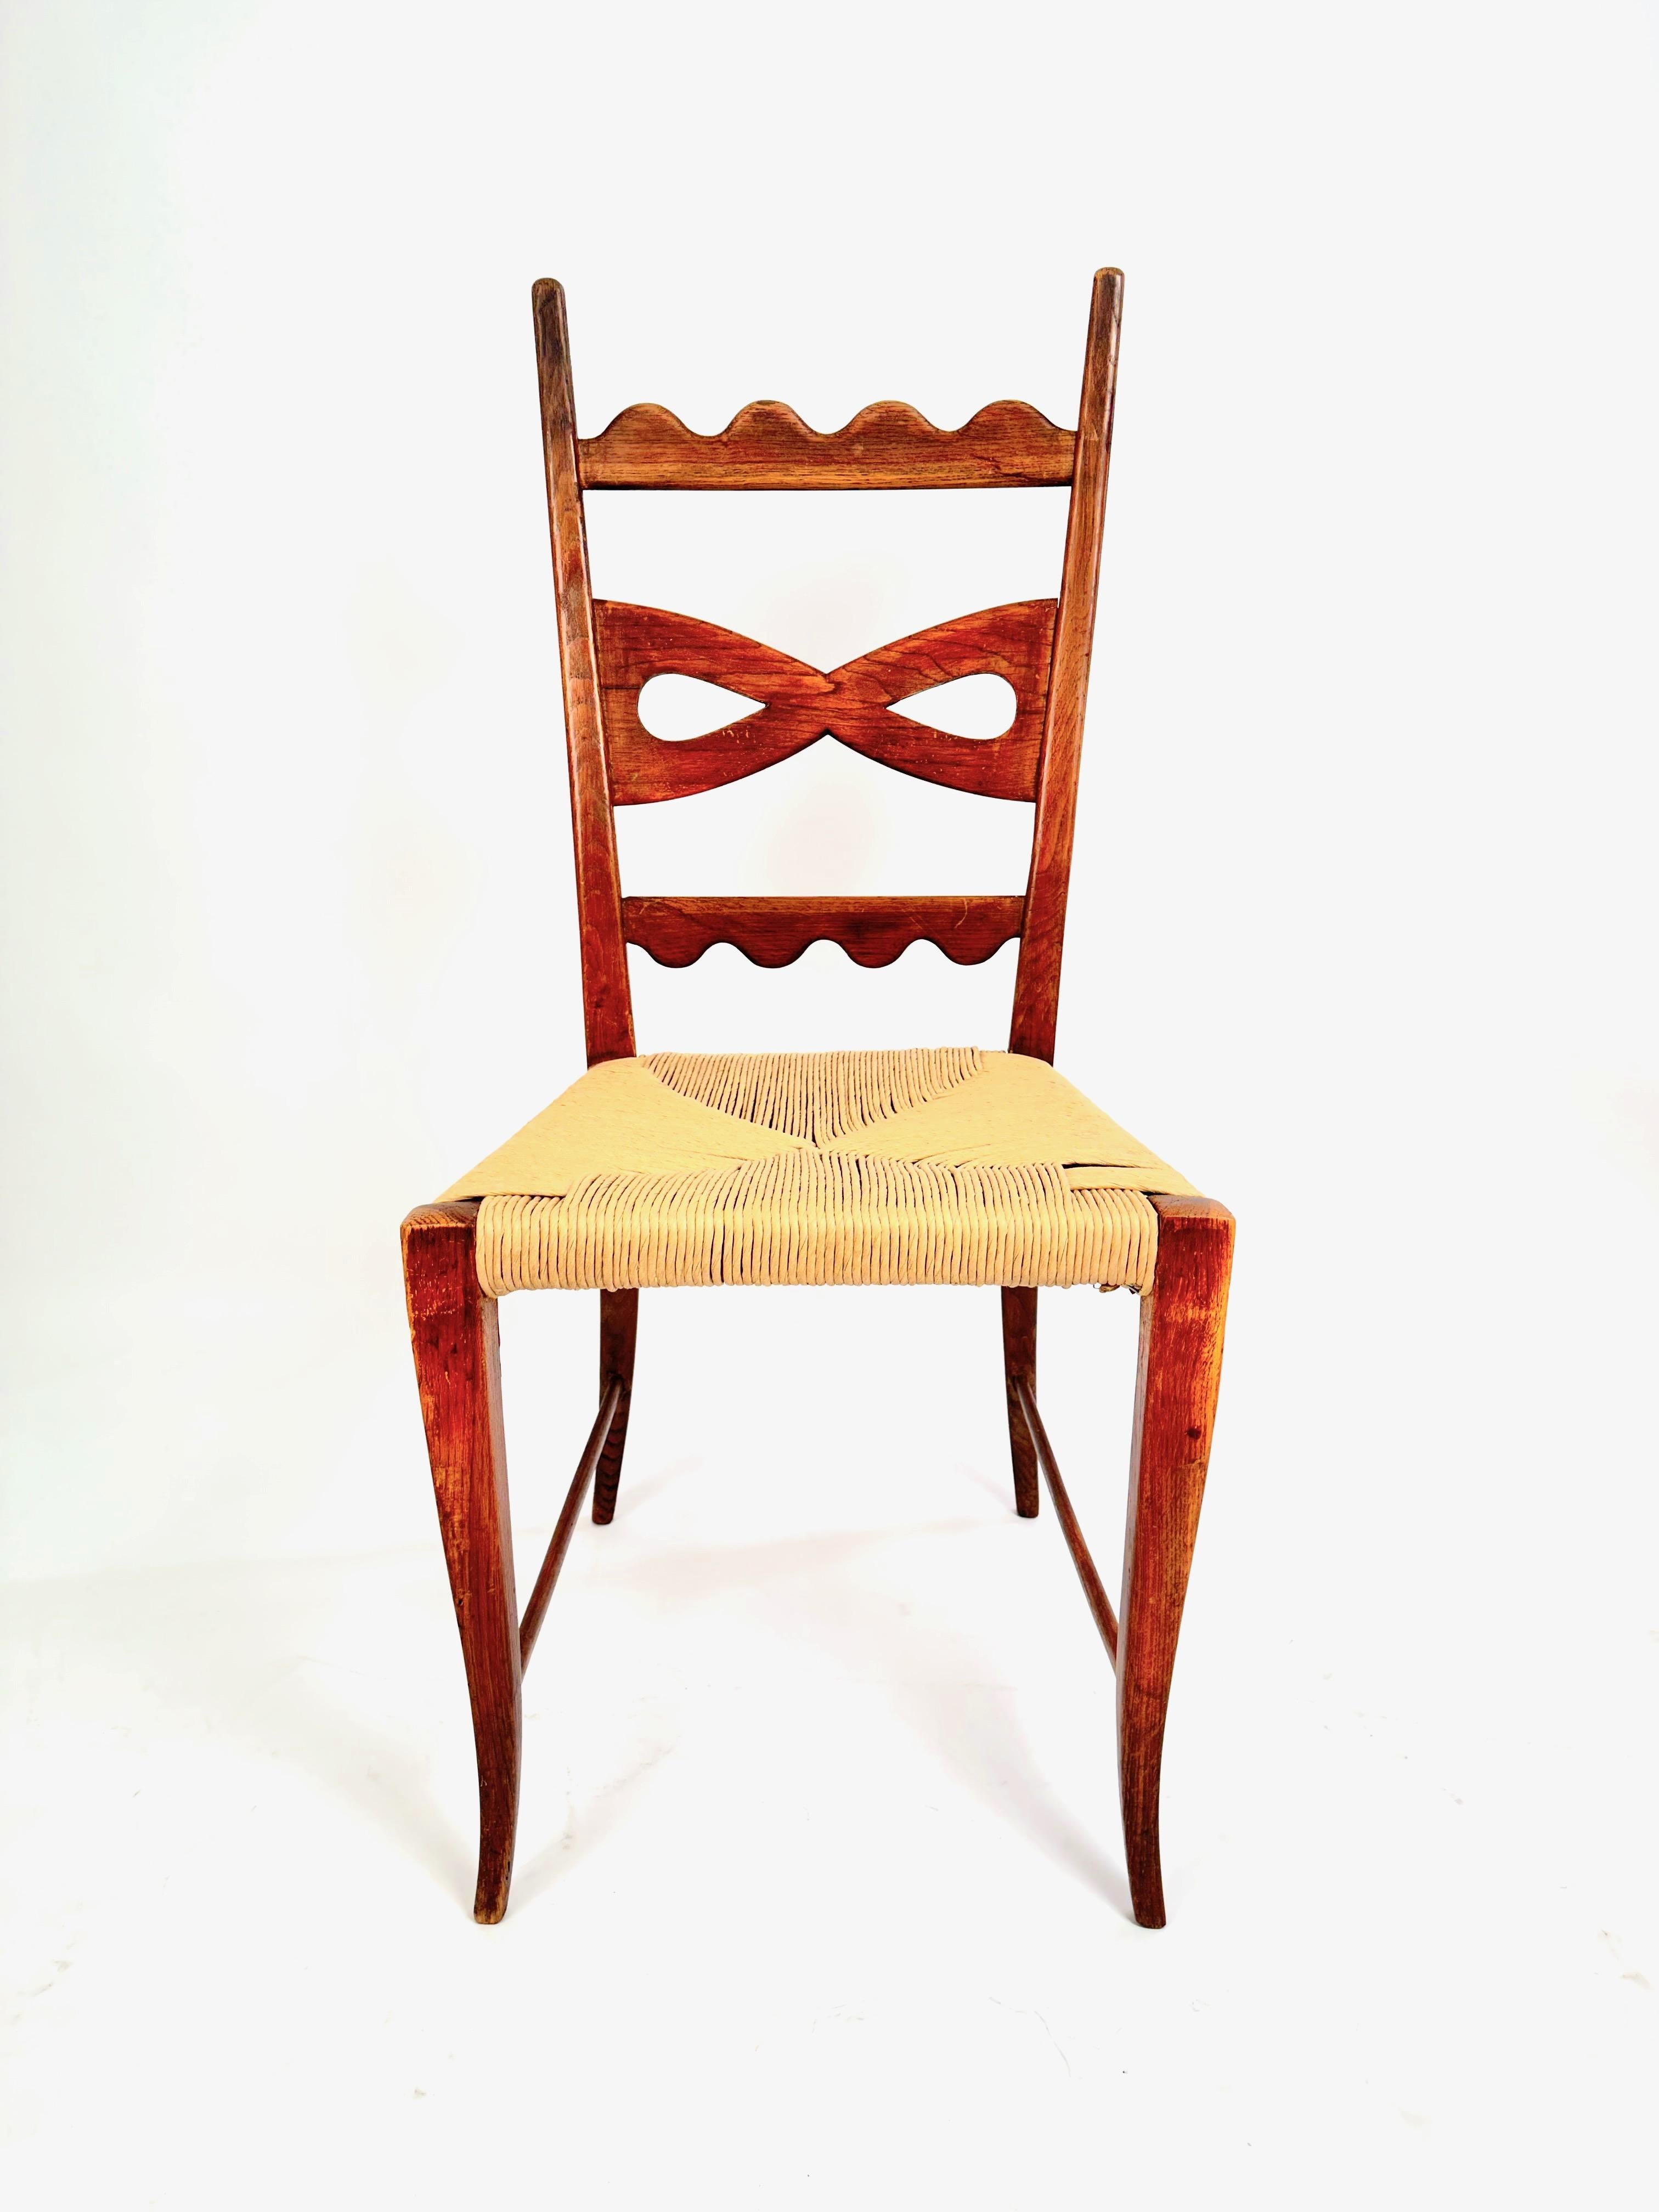 A rare set of six dining chairs, designed by Paolo Buffain the 1940s. Typical details for Buffa craftsmanship, including the decorative bow shaped and scalloped patterns on the back rests the carved ring pattern on the front legs and the carved